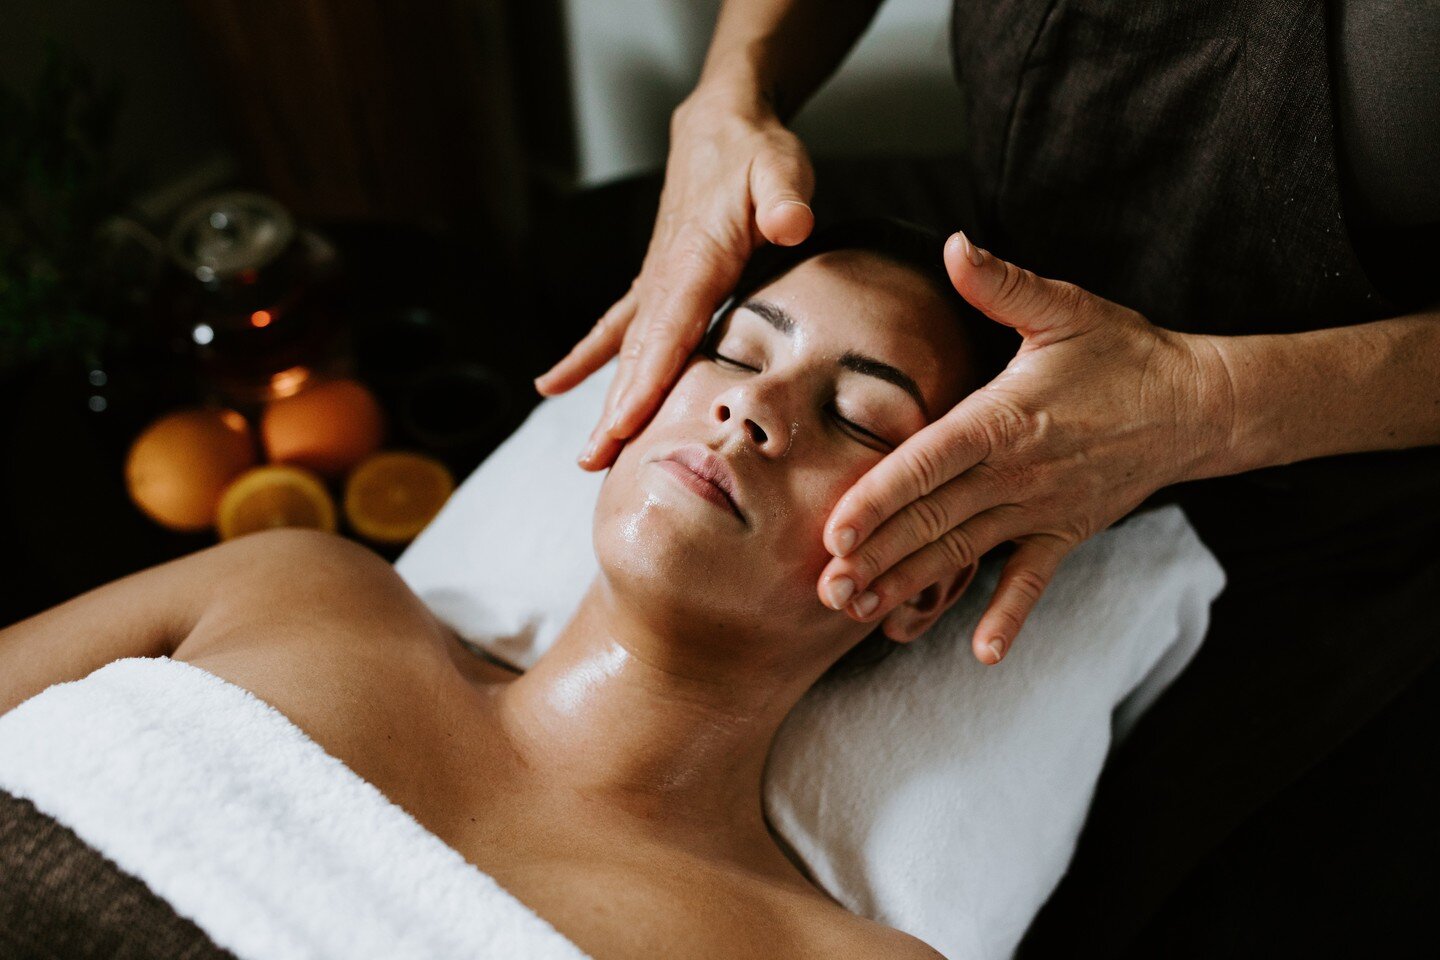 Australian therapists are increasingly turning to water-based treatments for a variety of physical and mental health conditions. For example, thermal mineral bathing combined with massage can benefit work-related illnesses such as stress, back-relate